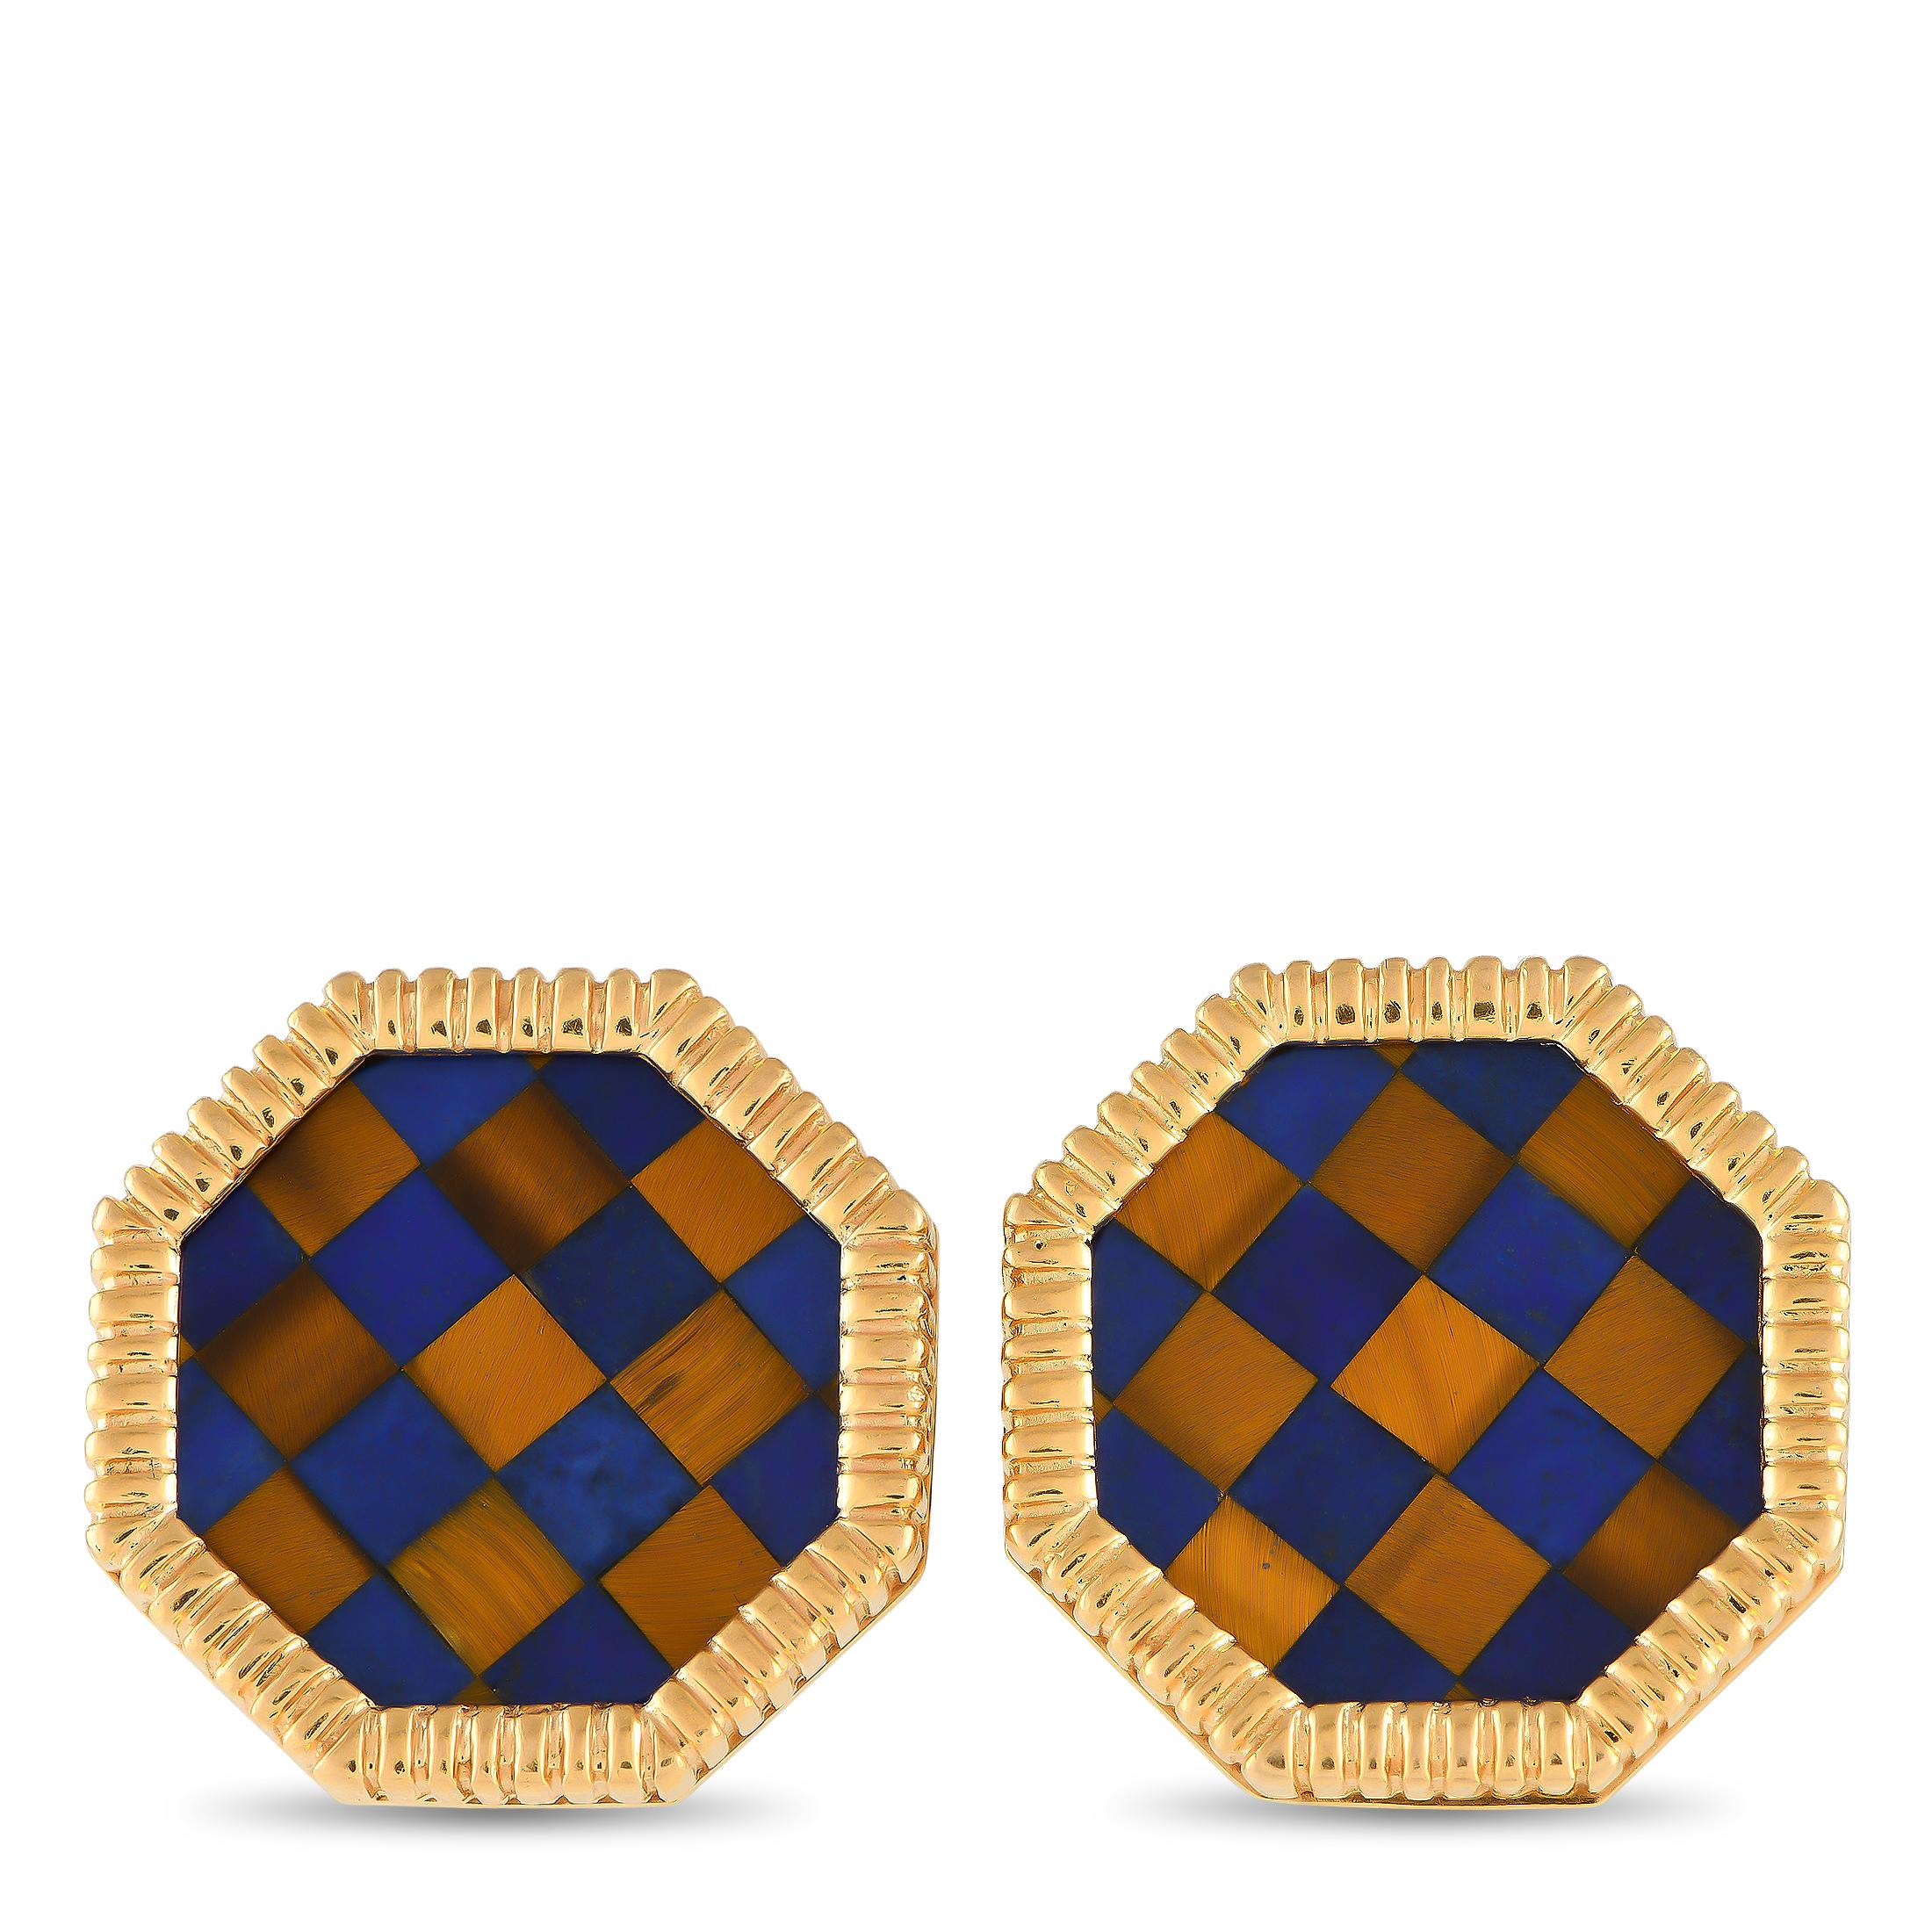 14K Yellow Gold Tigers Eye and Lapis Checkered Cufflinks MF13-012424 In Excellent Condition For Sale In Southampton, PA